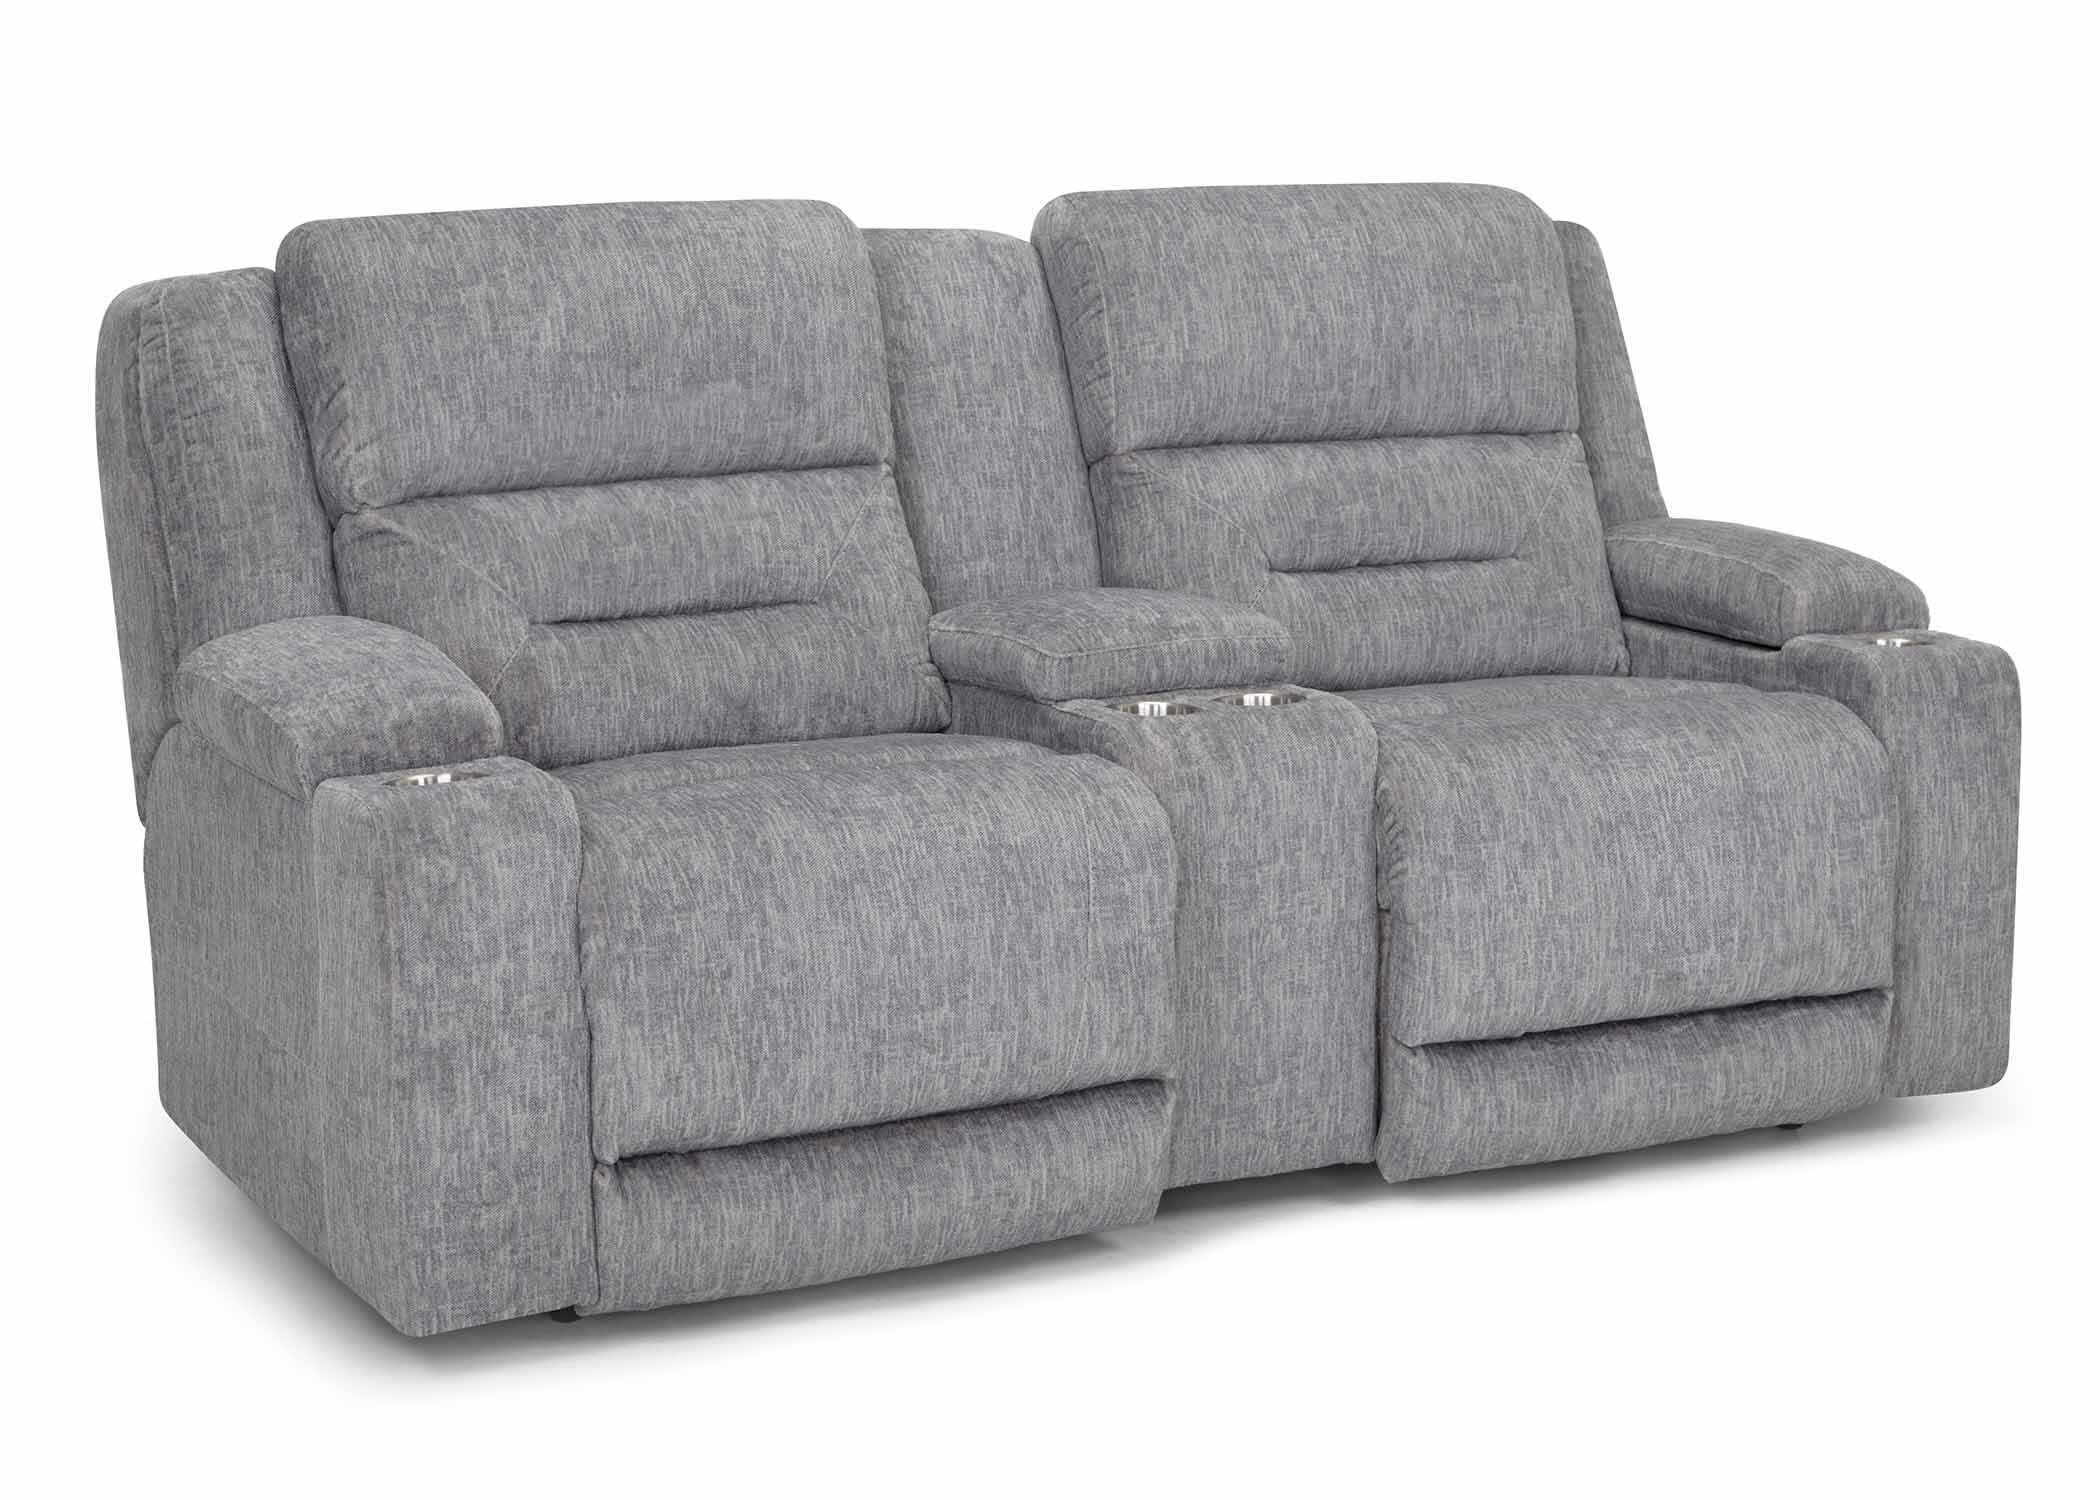  65235 Ace Reclining Console Loveseat in 1015-06 Plush Gray - Angled 